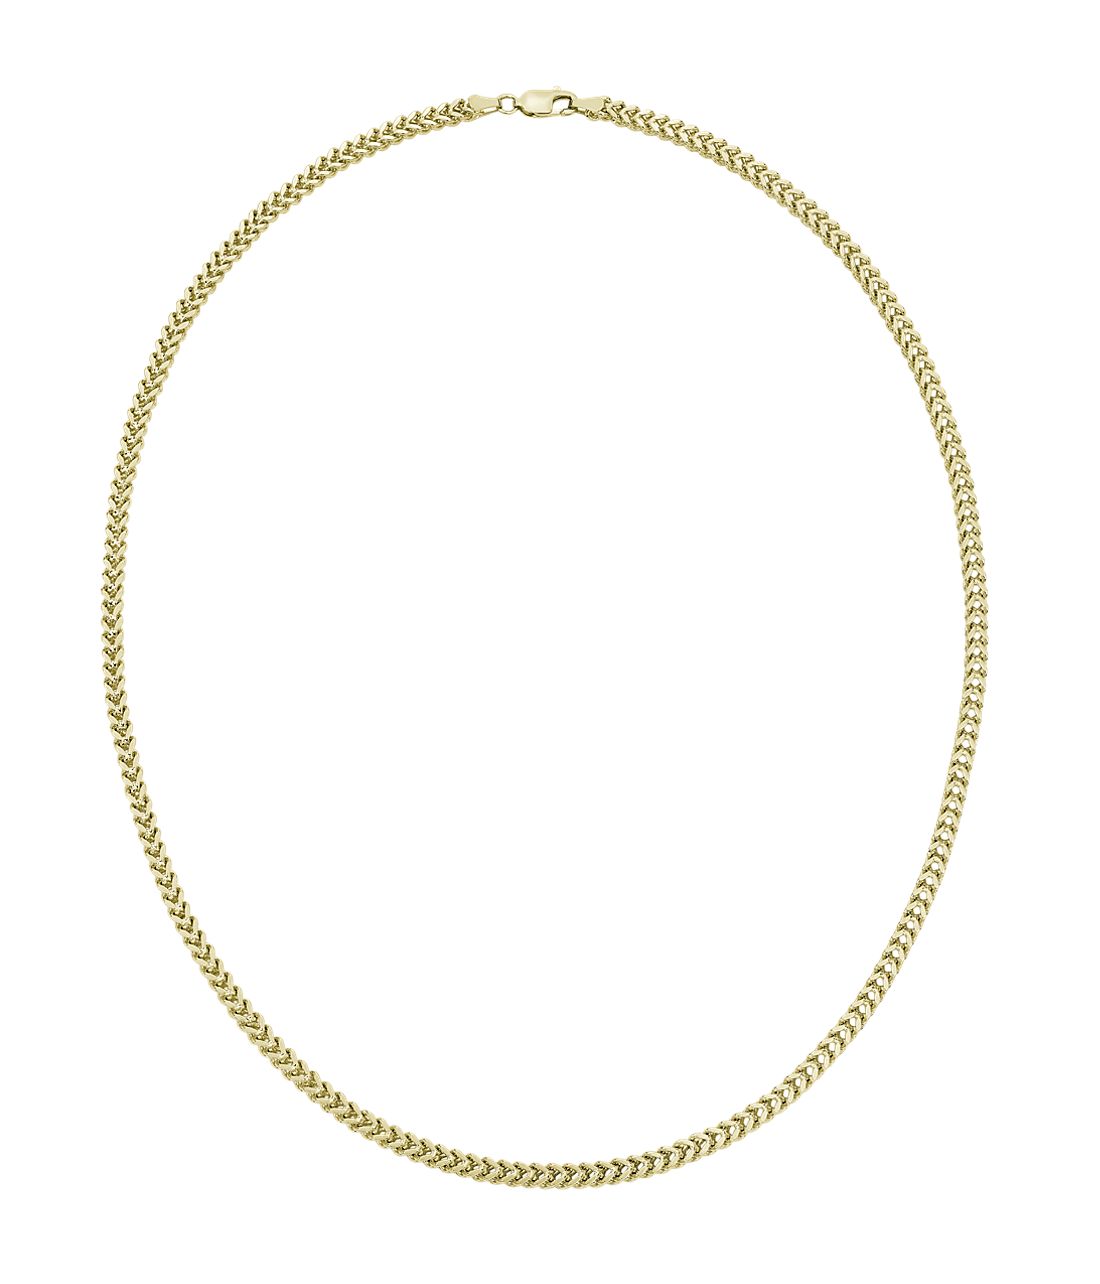 18" Franco Chain in 14k Yellow Gold (2.5 mm)